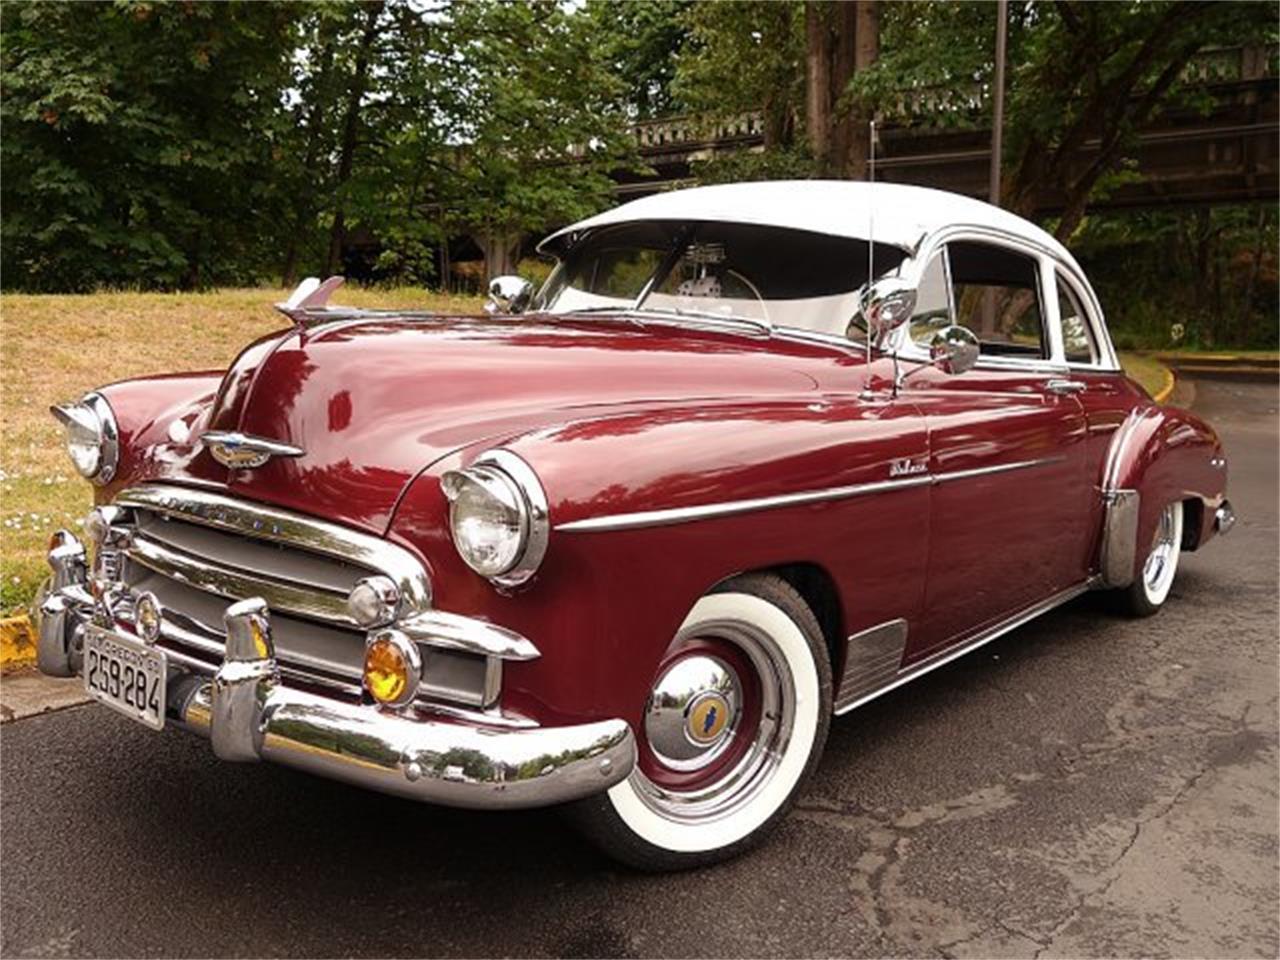 1950 Chevrolet Deluxe 2 door Business Coupe for Sale | ClassicCars.com